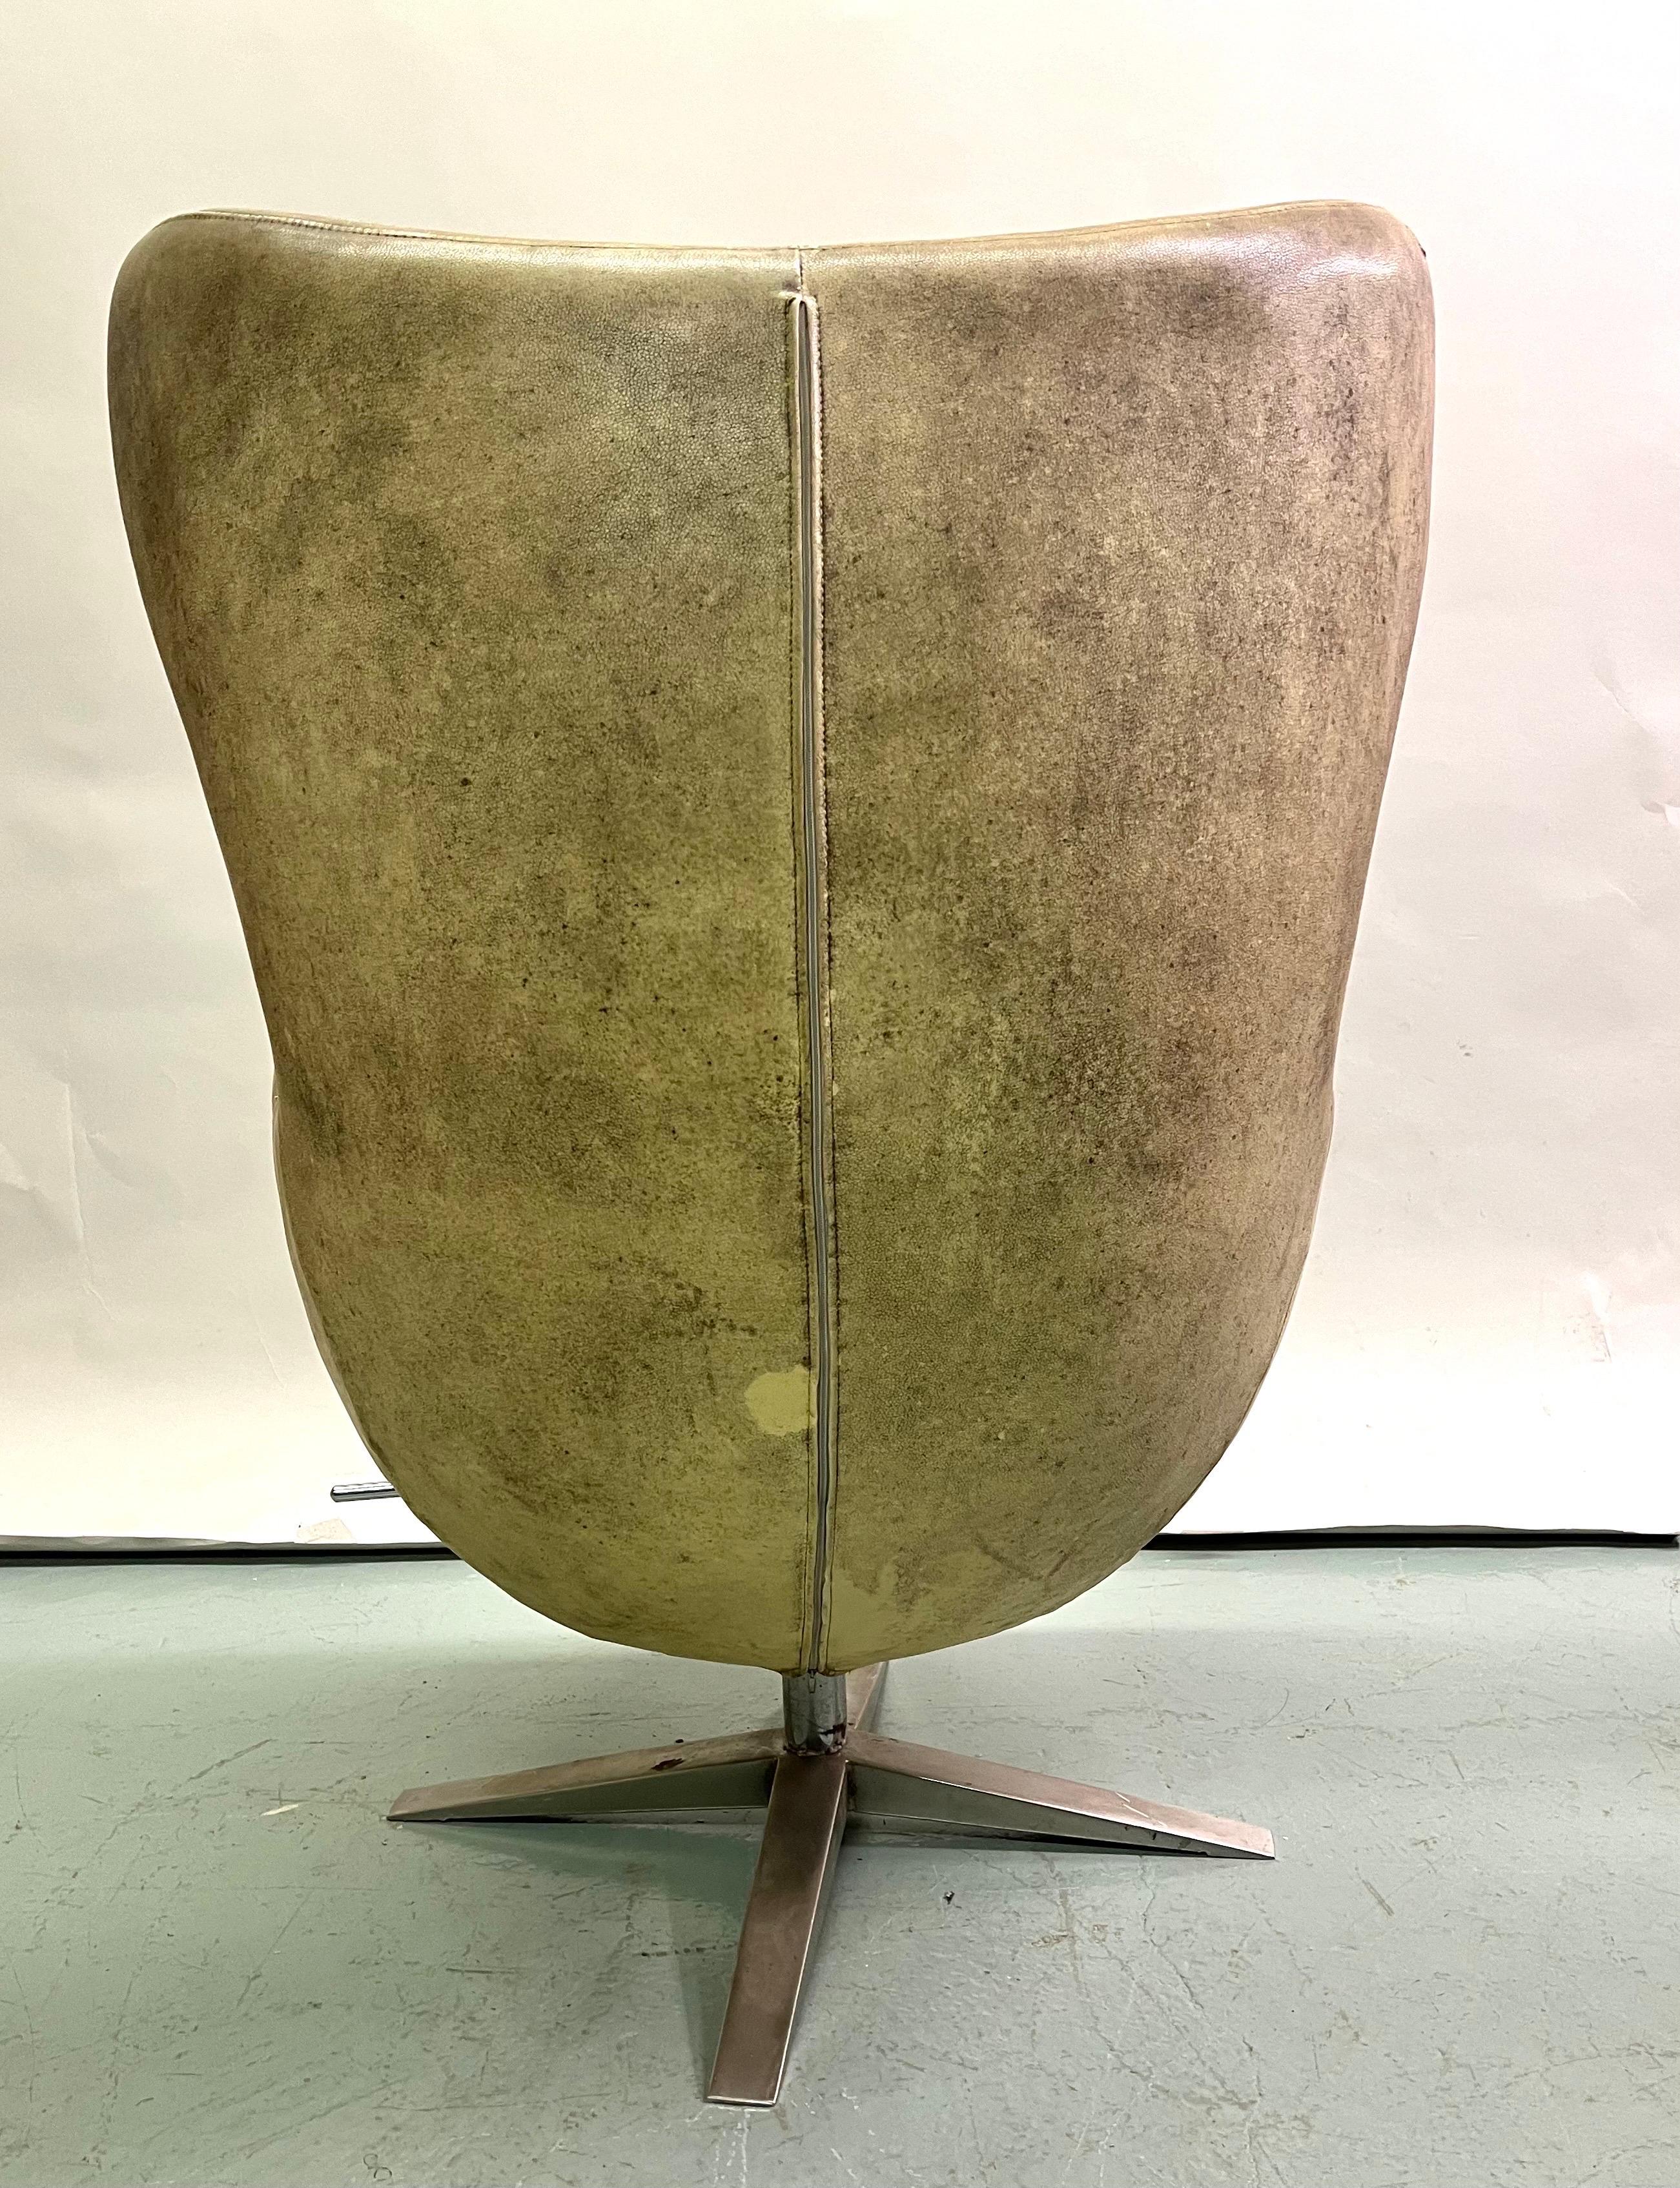 Early Model, Pair of Vintage Leather Danish Egg Chair, Arne Jacobsen, c. 1960 For Sale 3